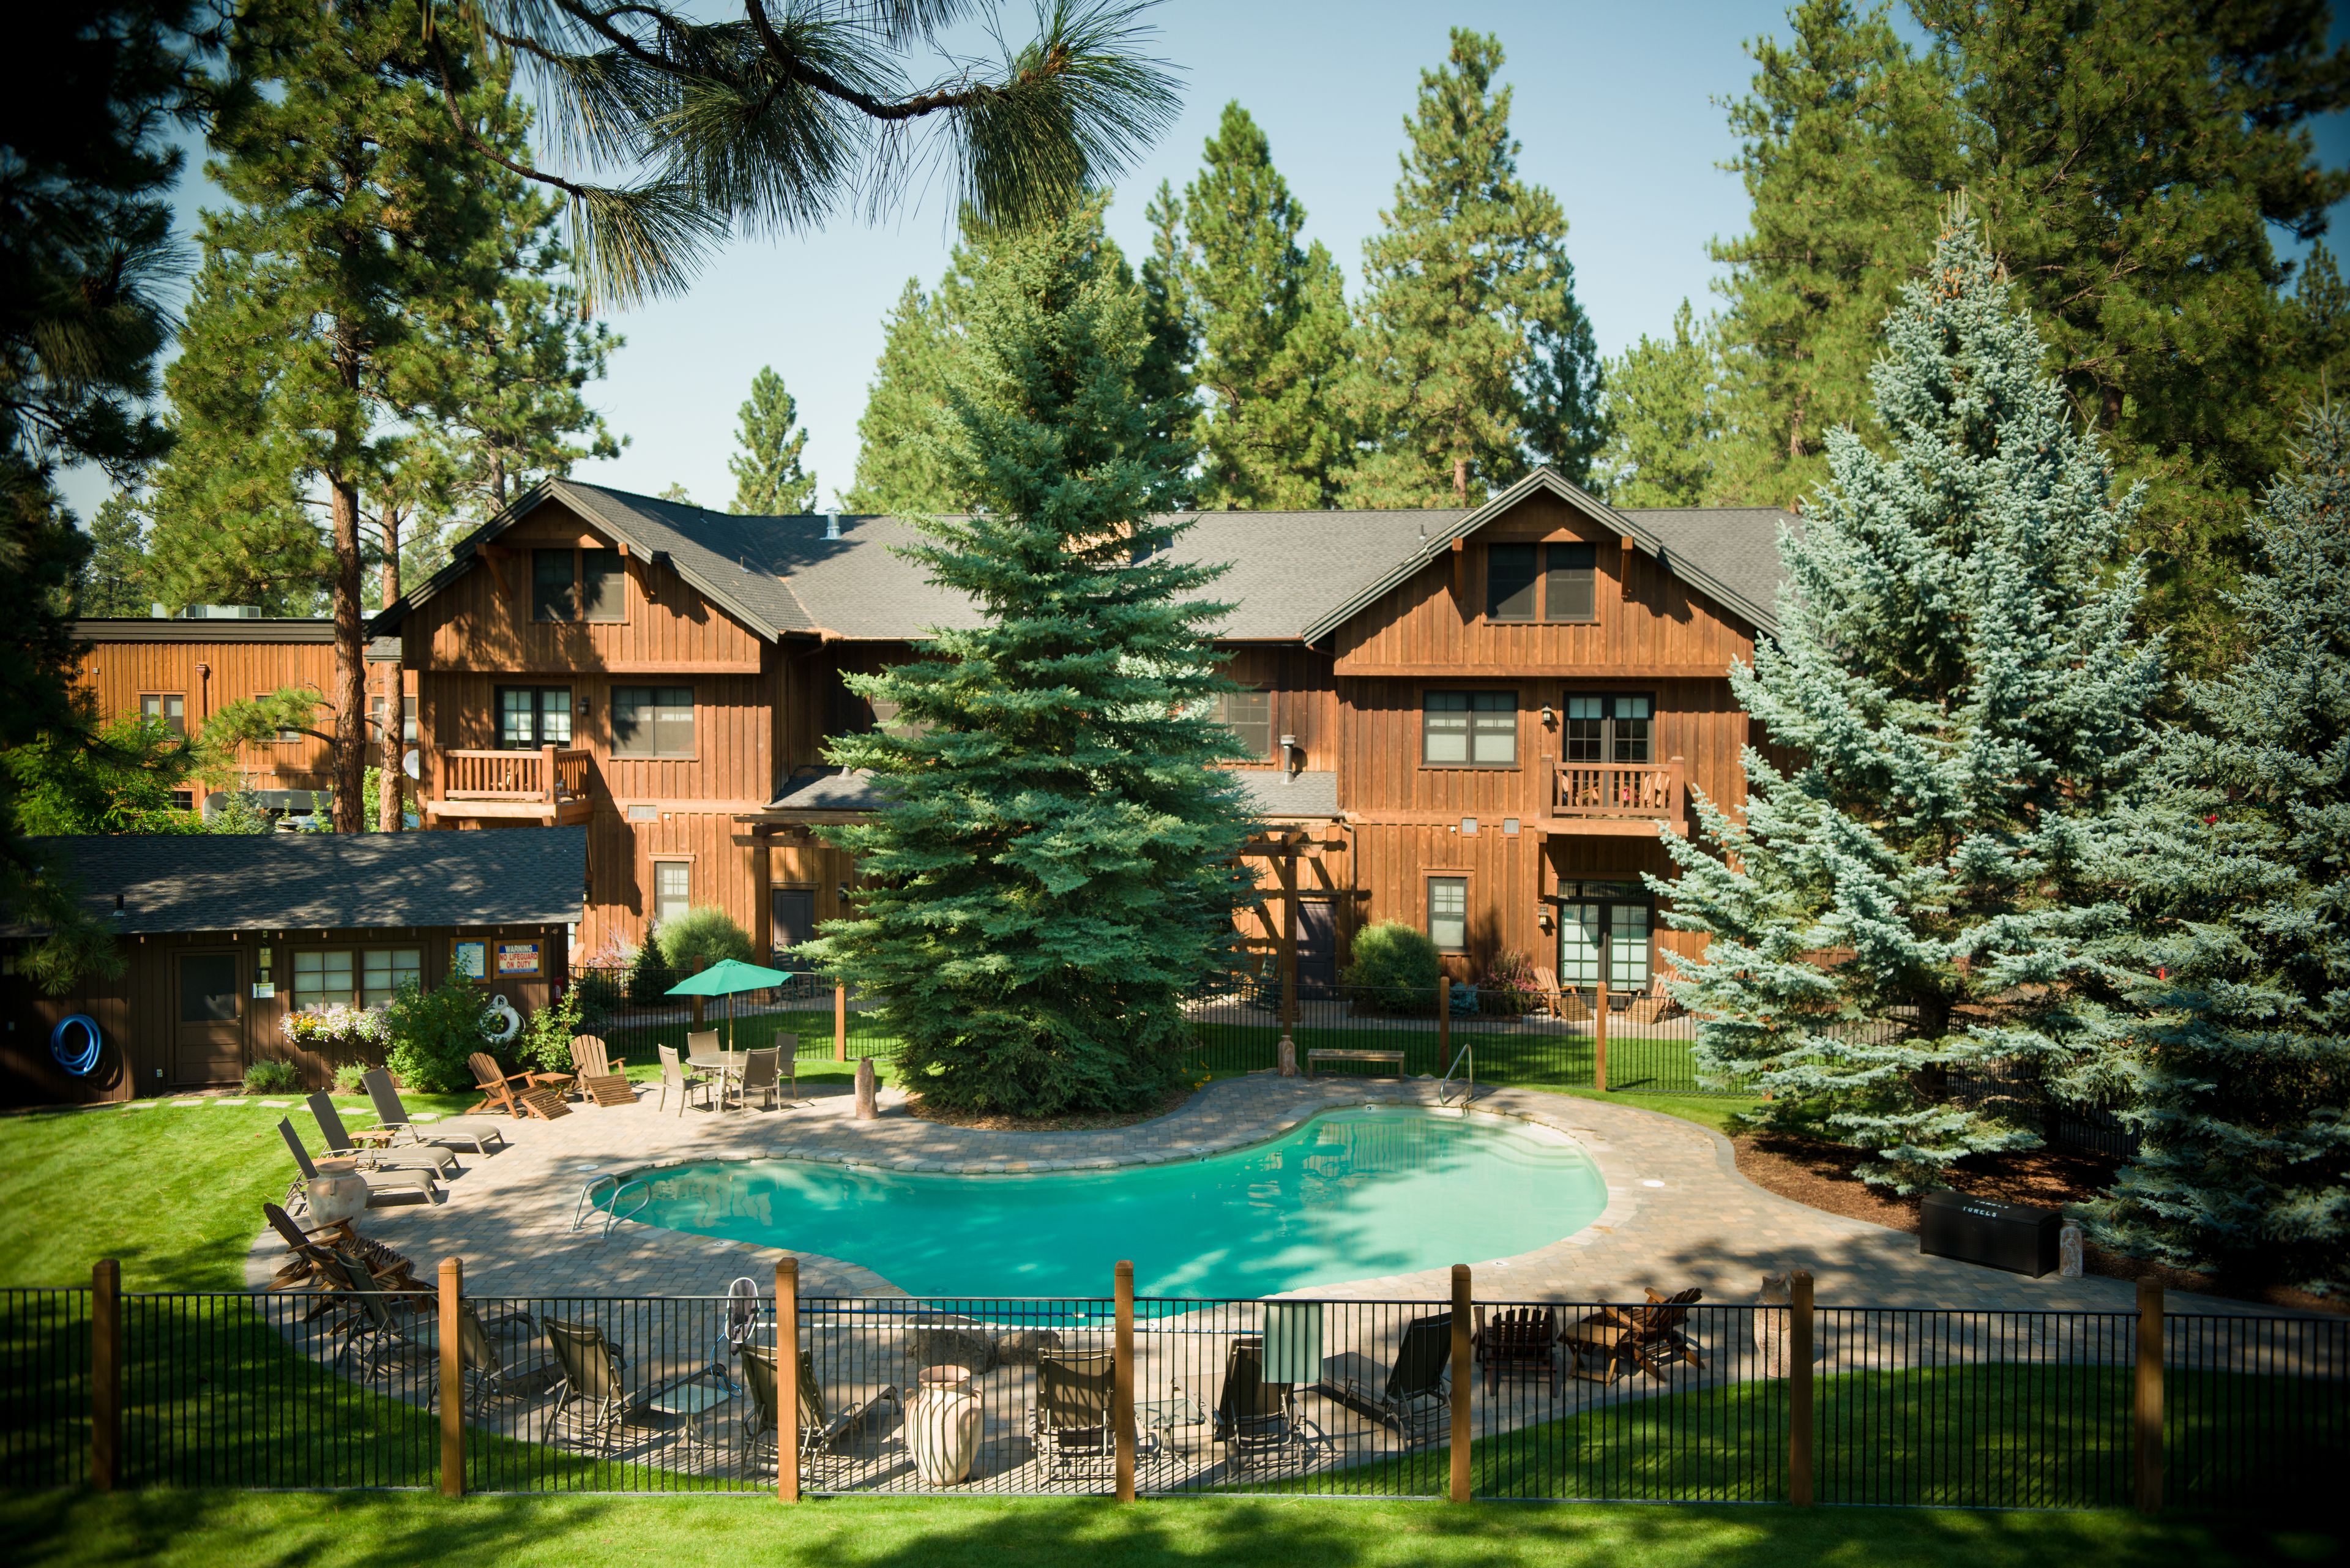 Pool view of Fivepine Lodge